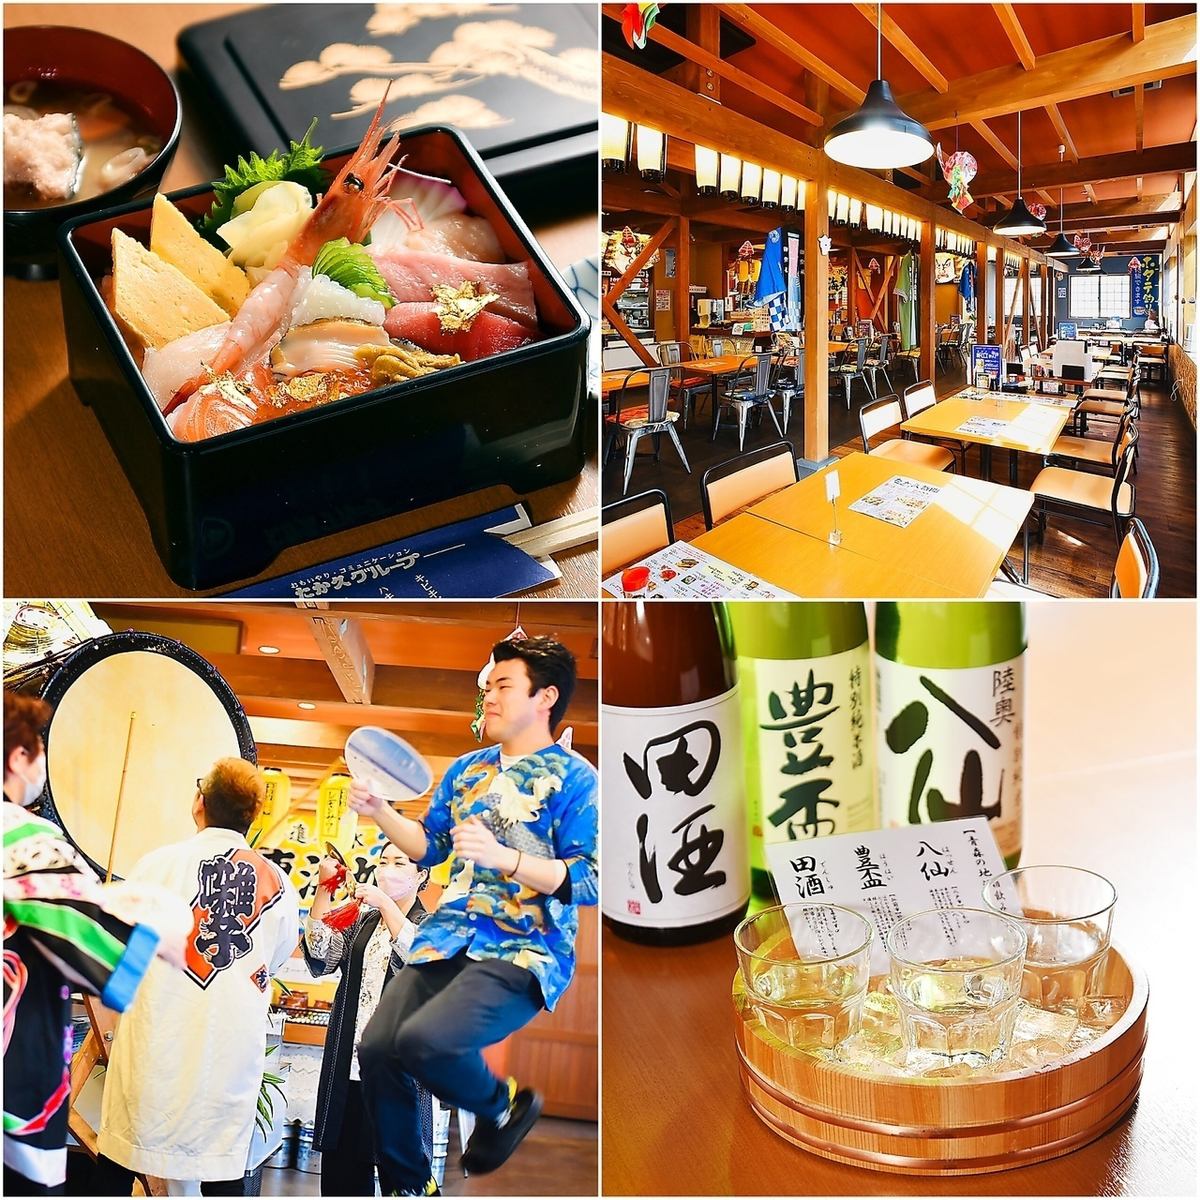 A 3-minute walk from Aomori Station♪ You can enjoy fresh seafood, Aomori's local cuisine, and scallop fishing in the store♪